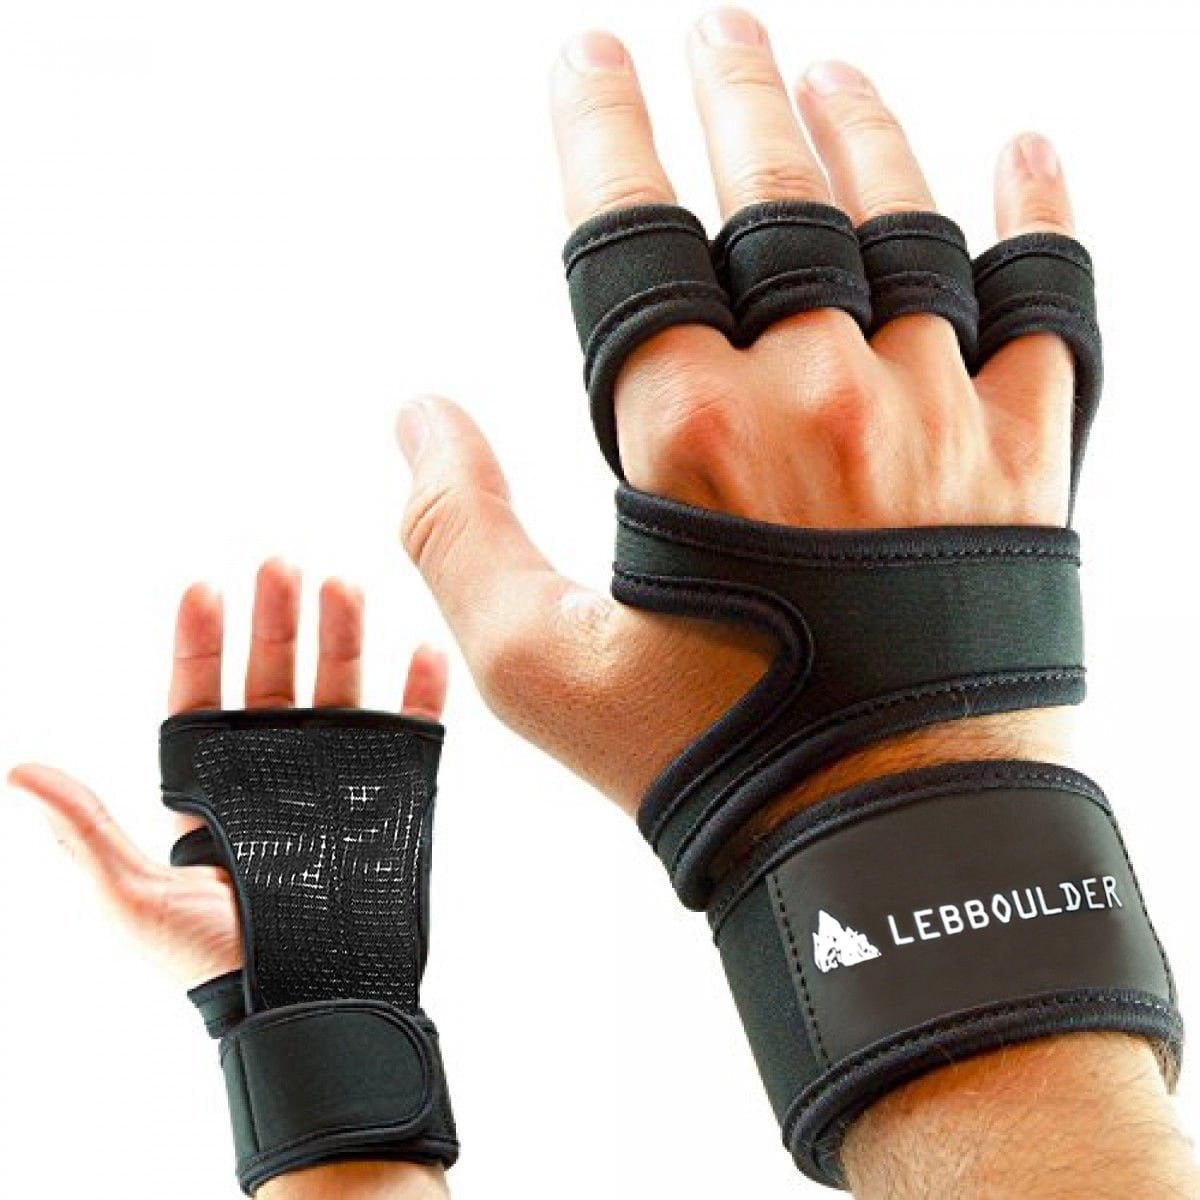 2x Weight Lifting Gym Gloves Training Fitness Wrist Wrap Sports Exercise Workout 